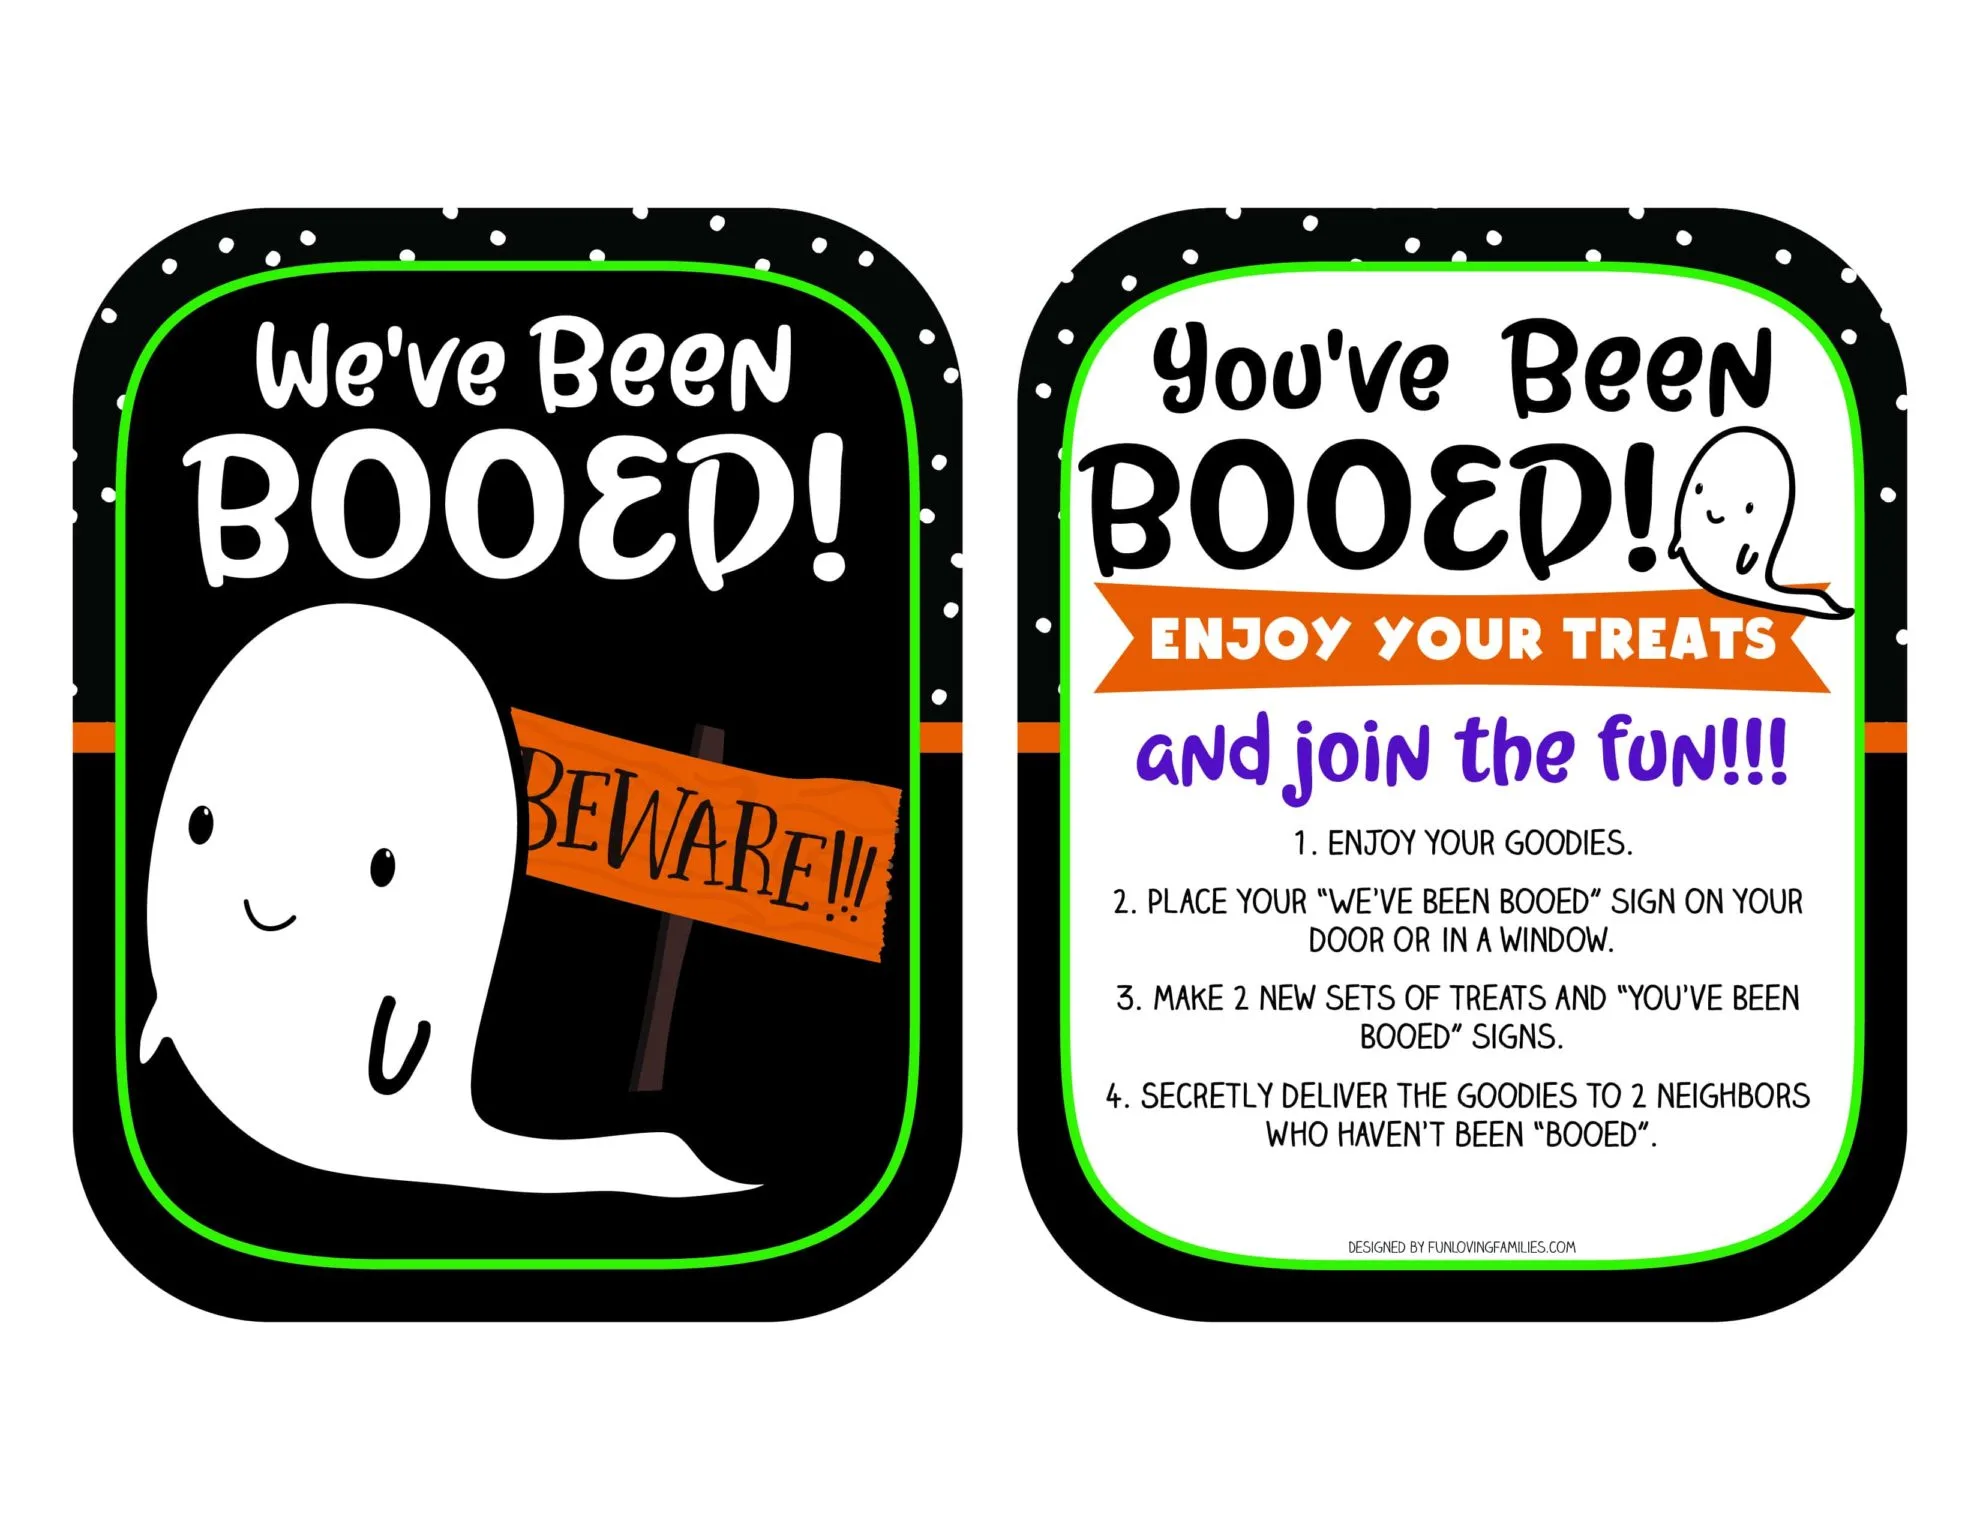 Print these new You've been booed and We've been booed signs for some Halloween fun around the neighborhood. Click through to learn how to play the game.